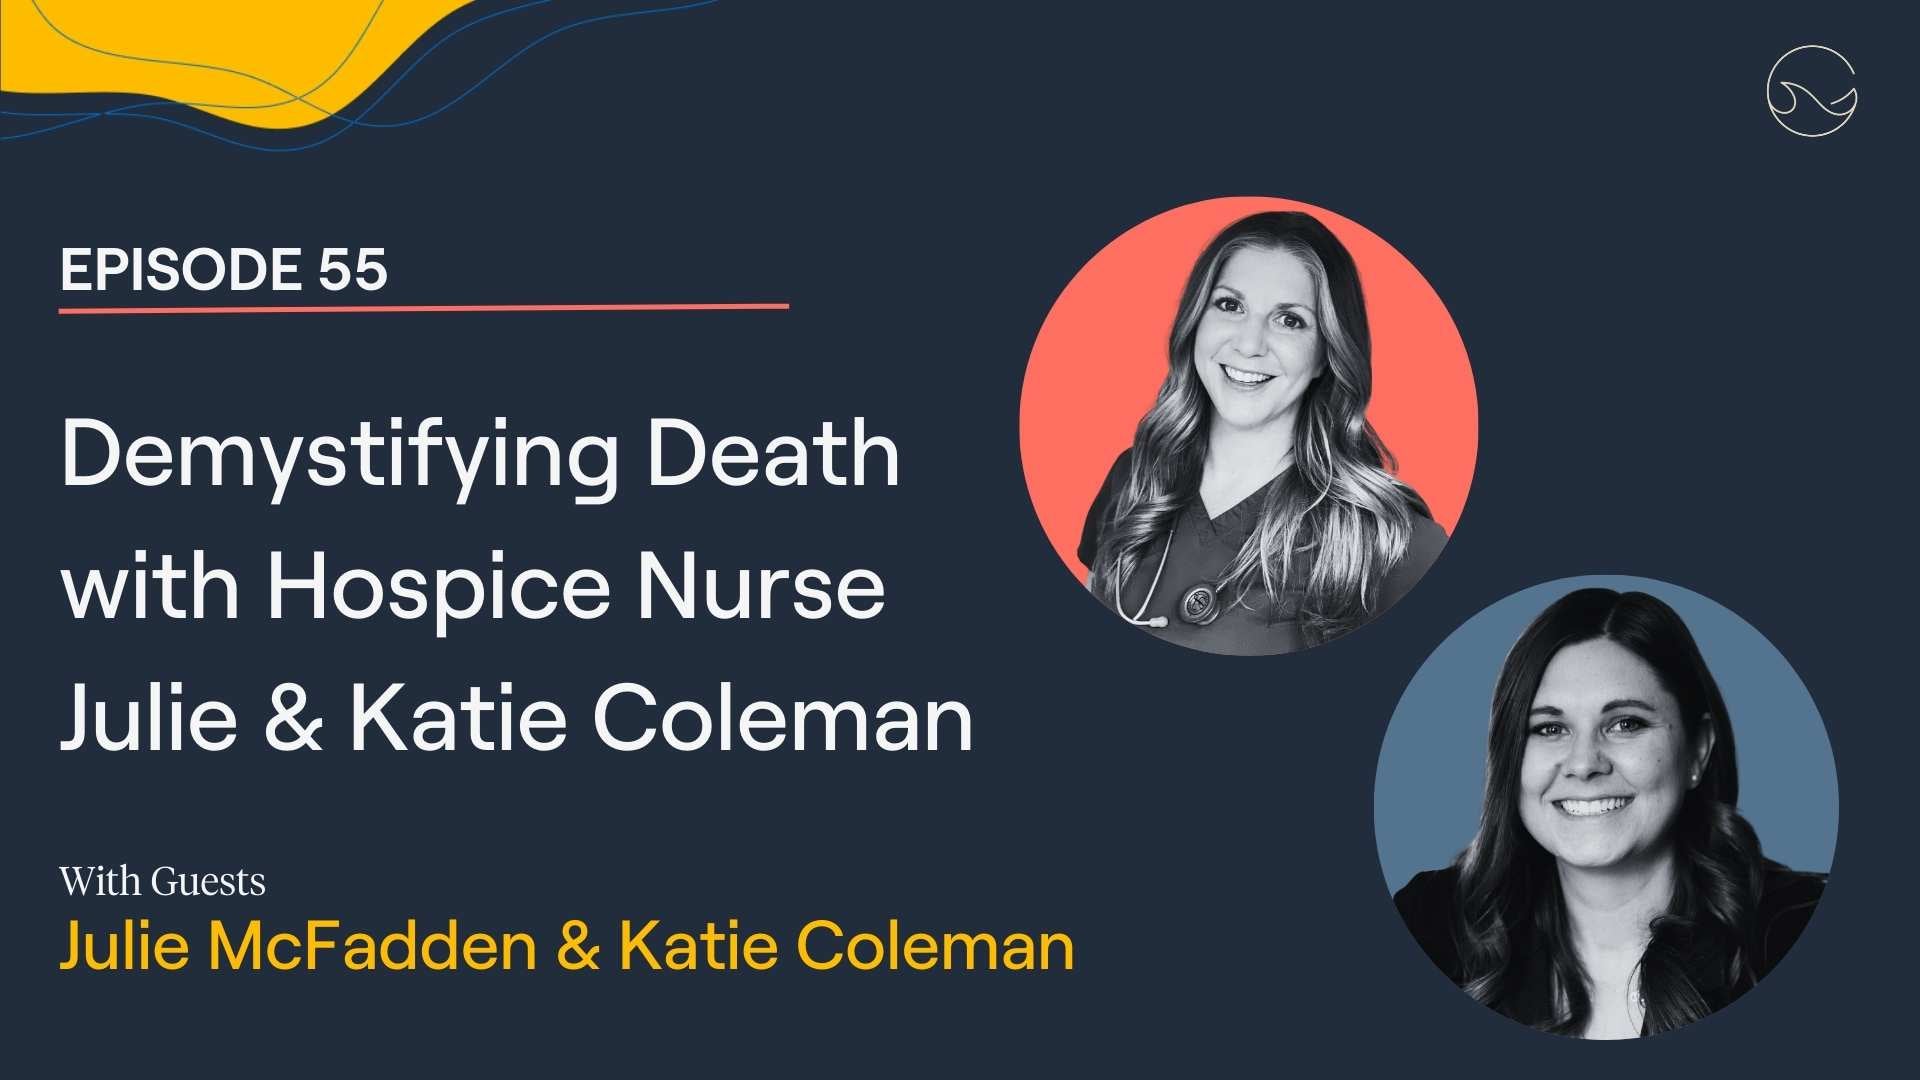 Load video: In this episode, we embark on a profound exploration of death with the help of two remarkable individuals. Katie Coleman bravely shares her experience as a survivor of Stage IV liver cancer, a path fraught with uncertainty and a lack of available information. Julie McFadden is a hospice nurse whose daily encounters with death provide unique insights.